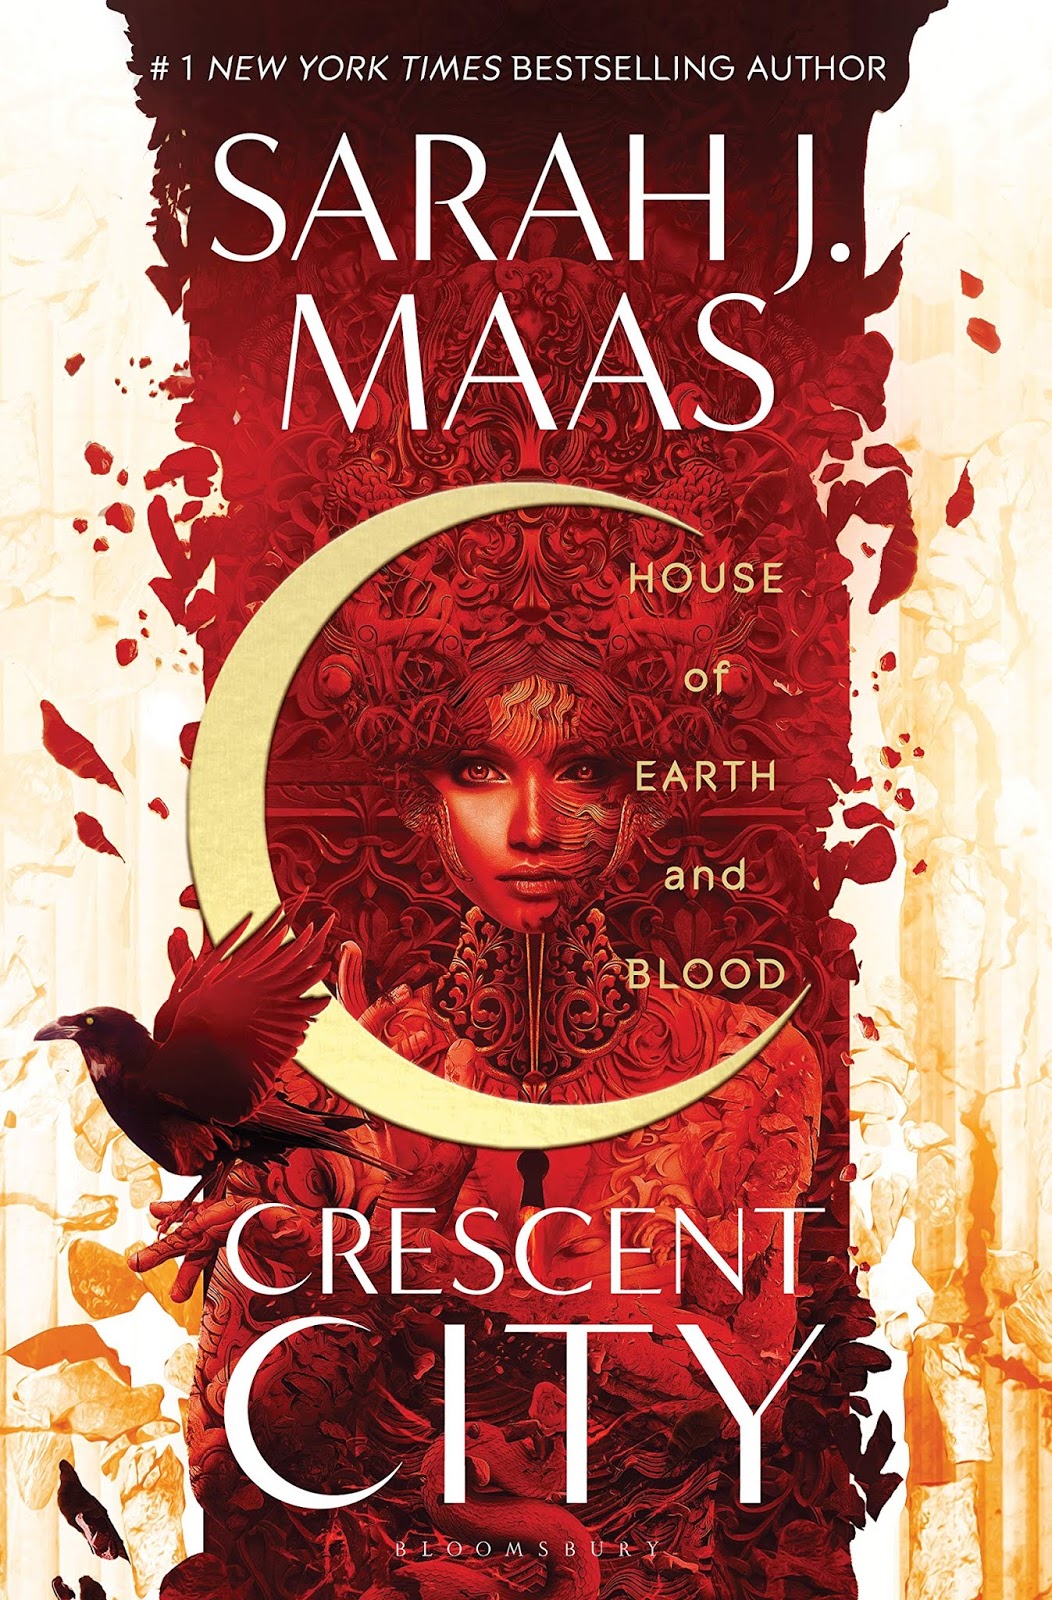 House of Earth and Blood by Sarah J. Maa